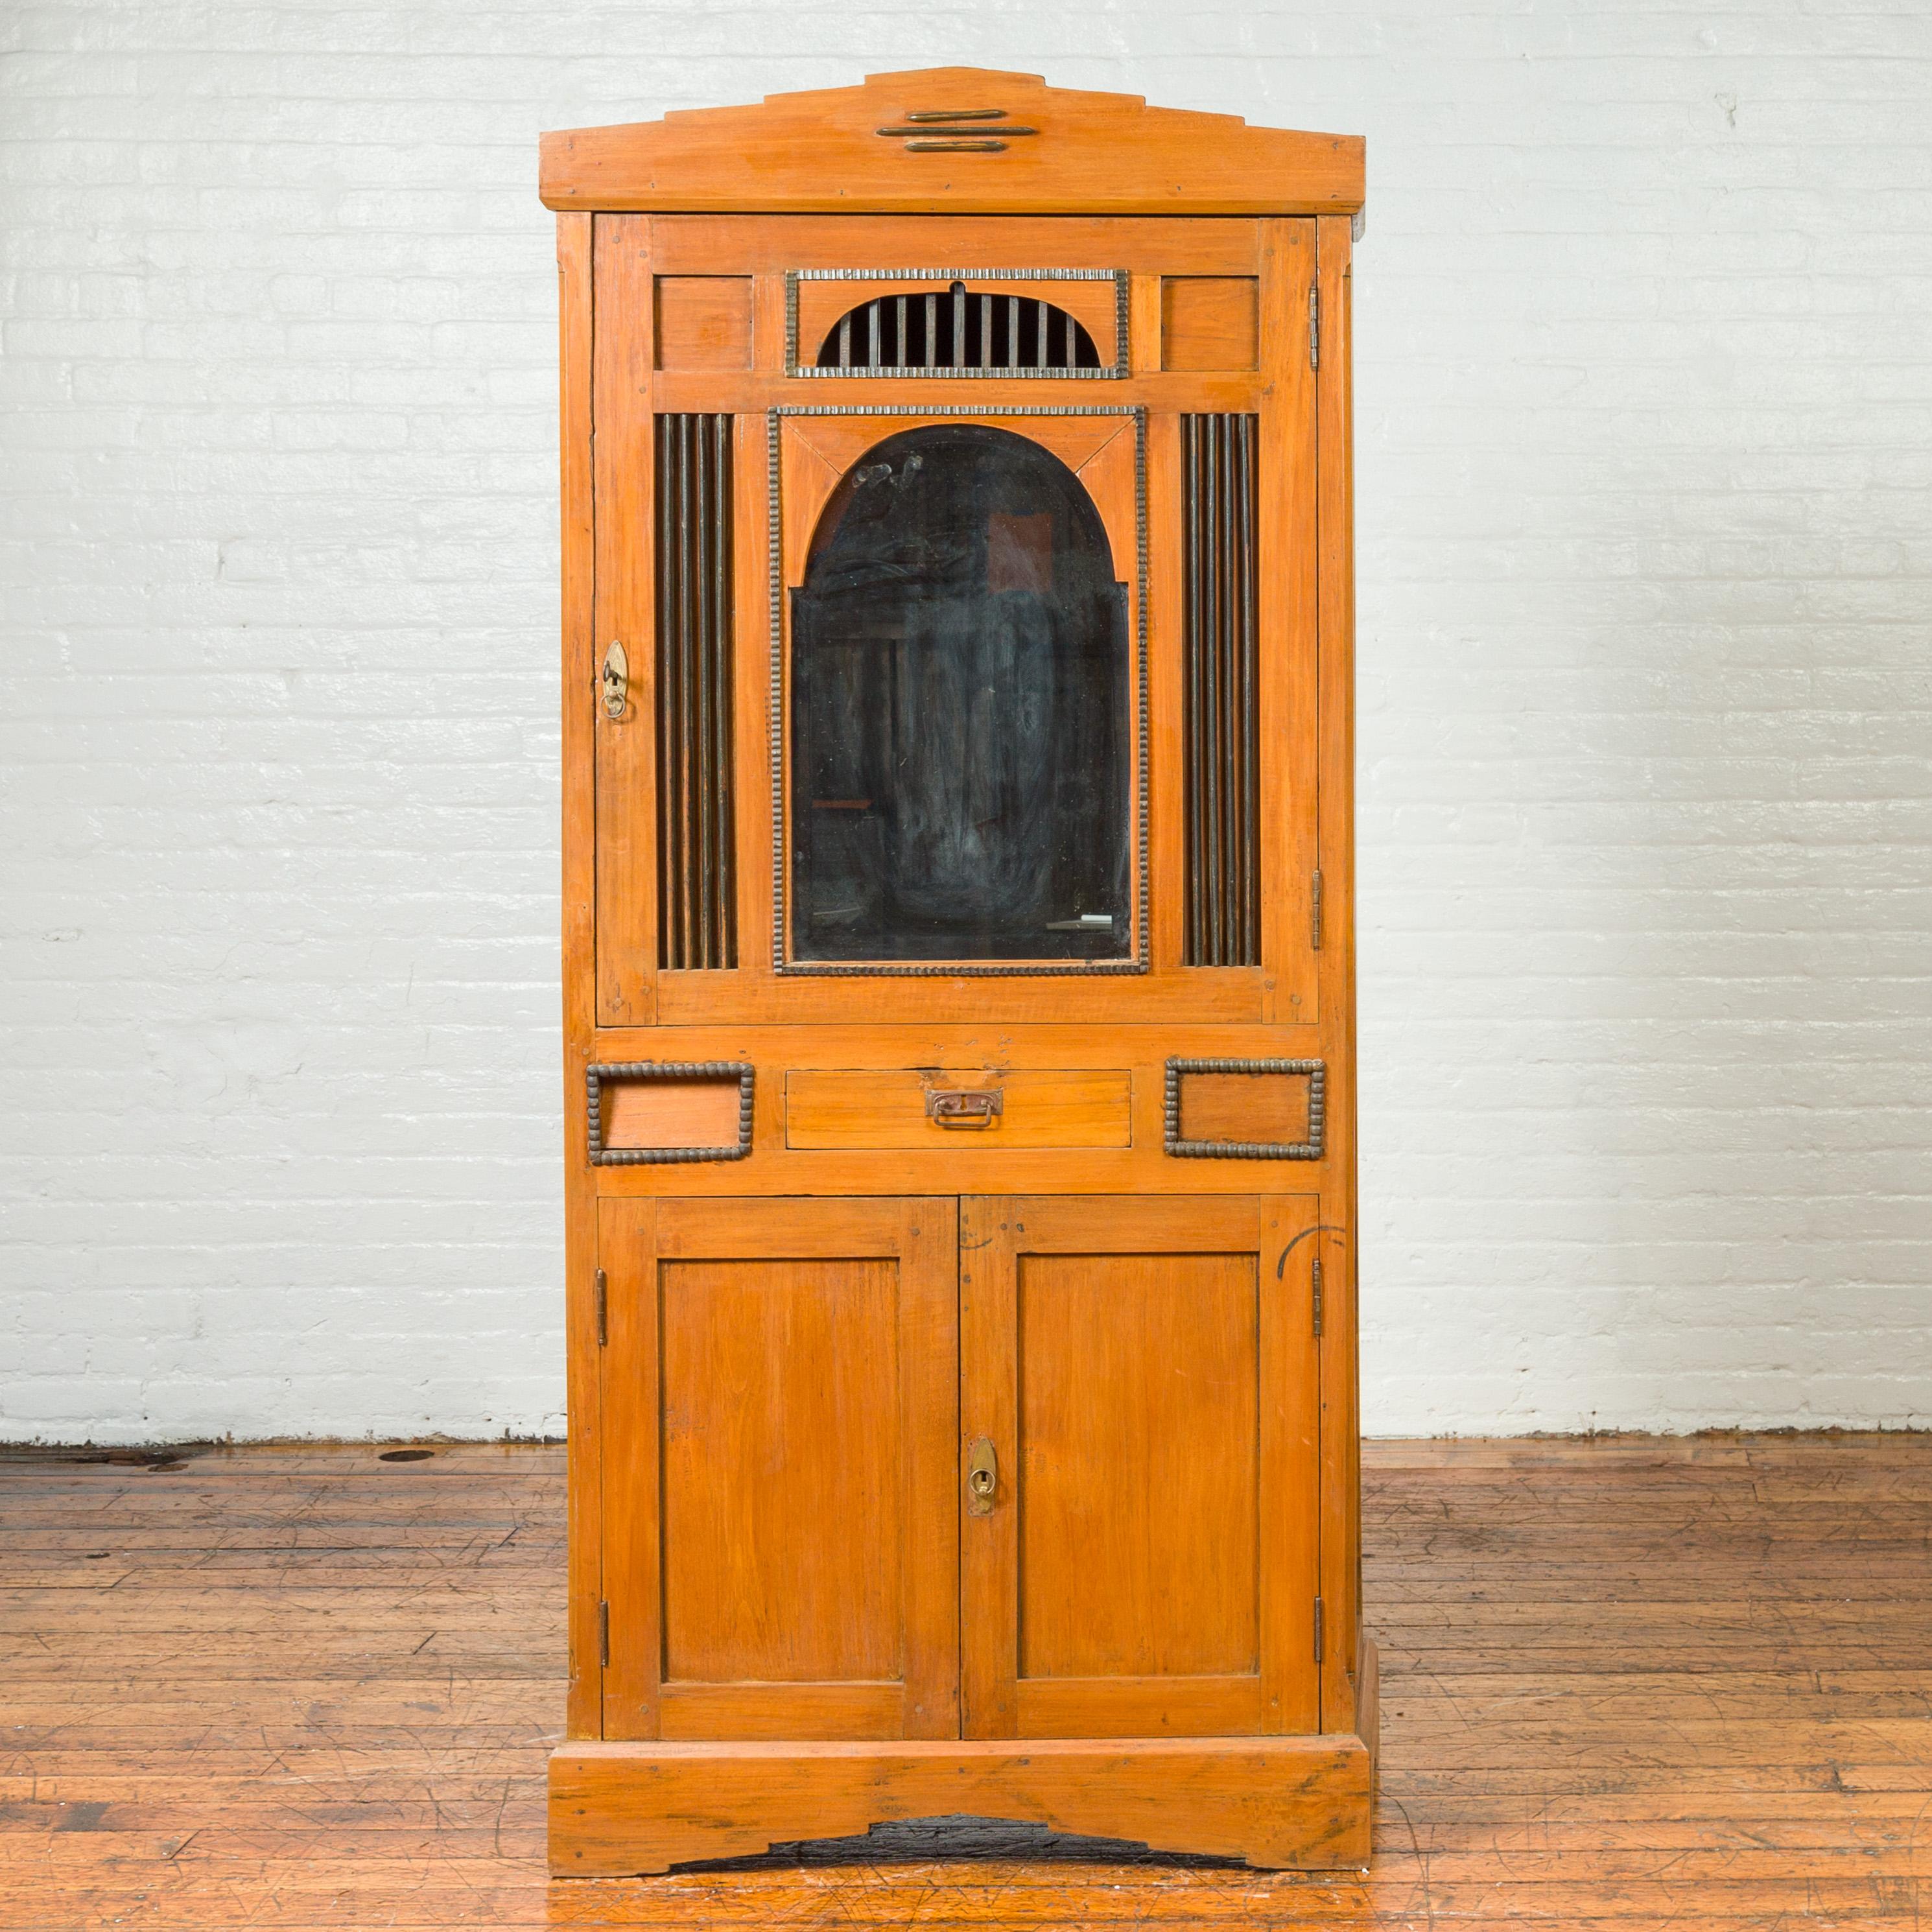 A vintage Dutch Colonial Art Deco style cabinet from the mid-20th century, with doors, drawers and mirrored front. Discover the elegant fusion of colonial design and Art Deco style with this vintage Dutch Colonial cabinet from the mid-20th century.